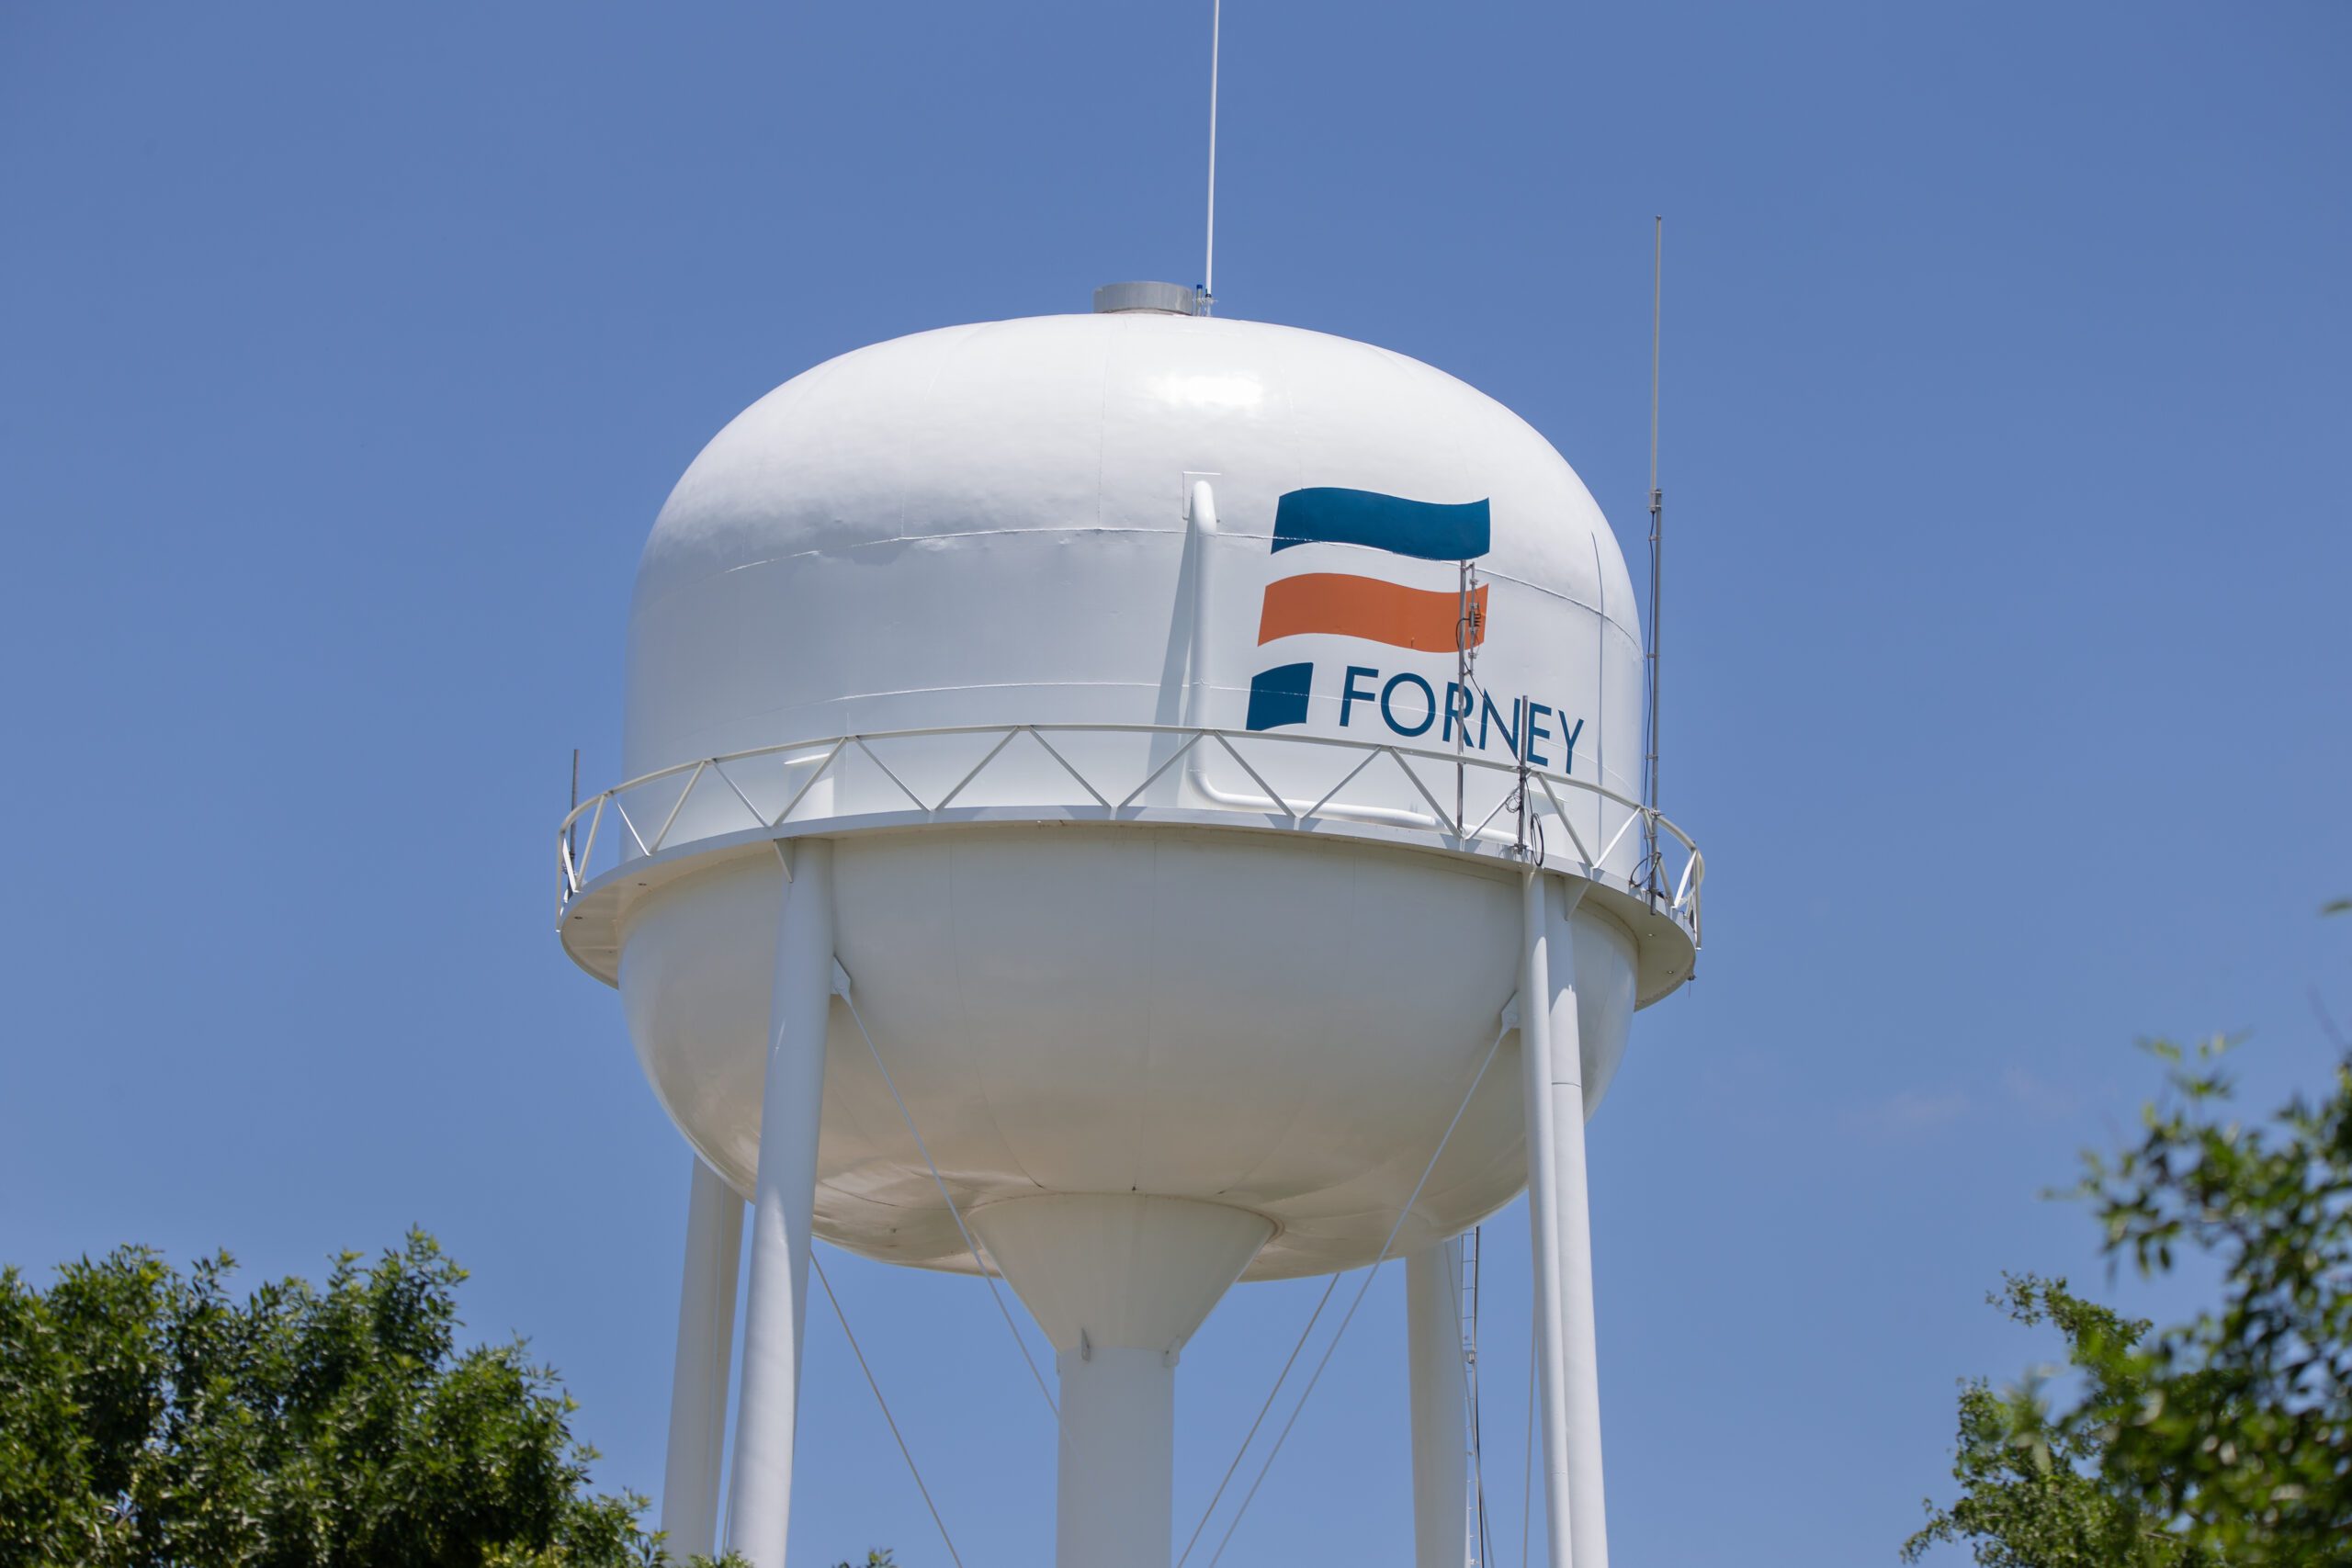 Forney_water tower_phil sirois